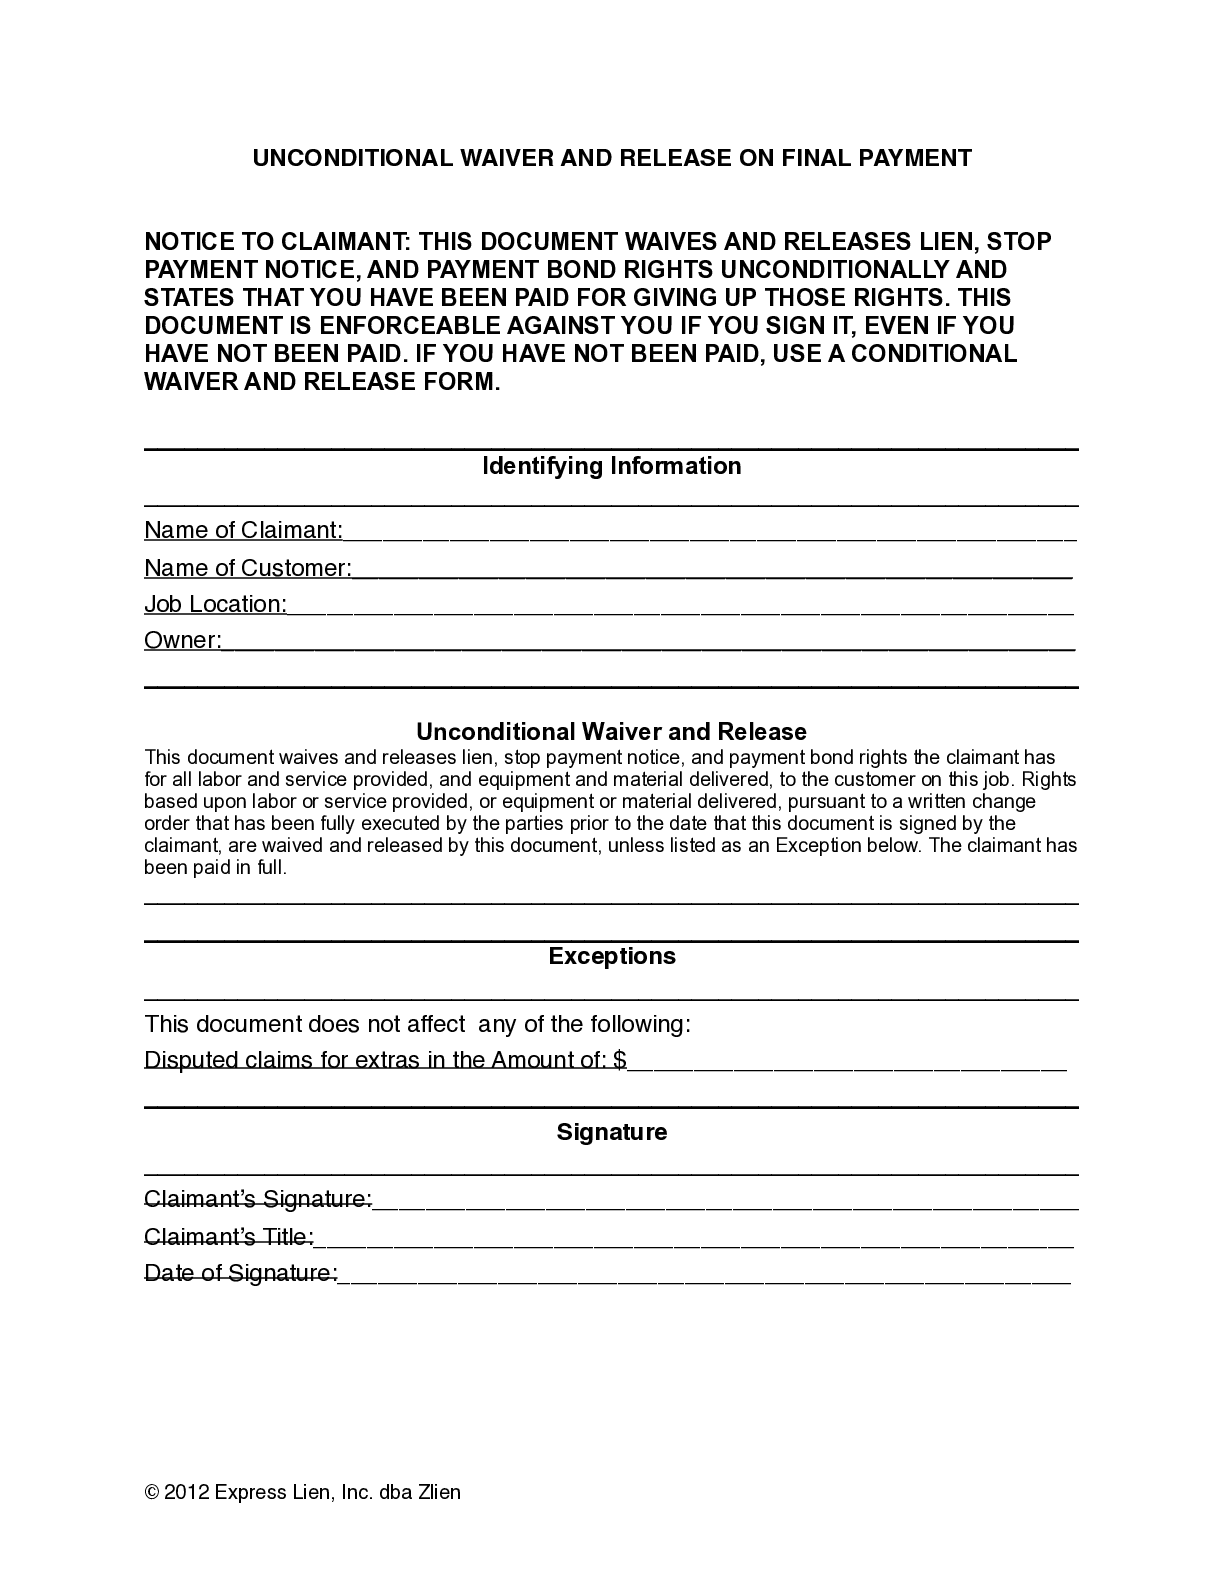 Iowa Final Unconditional Lien Waiver Form - free from